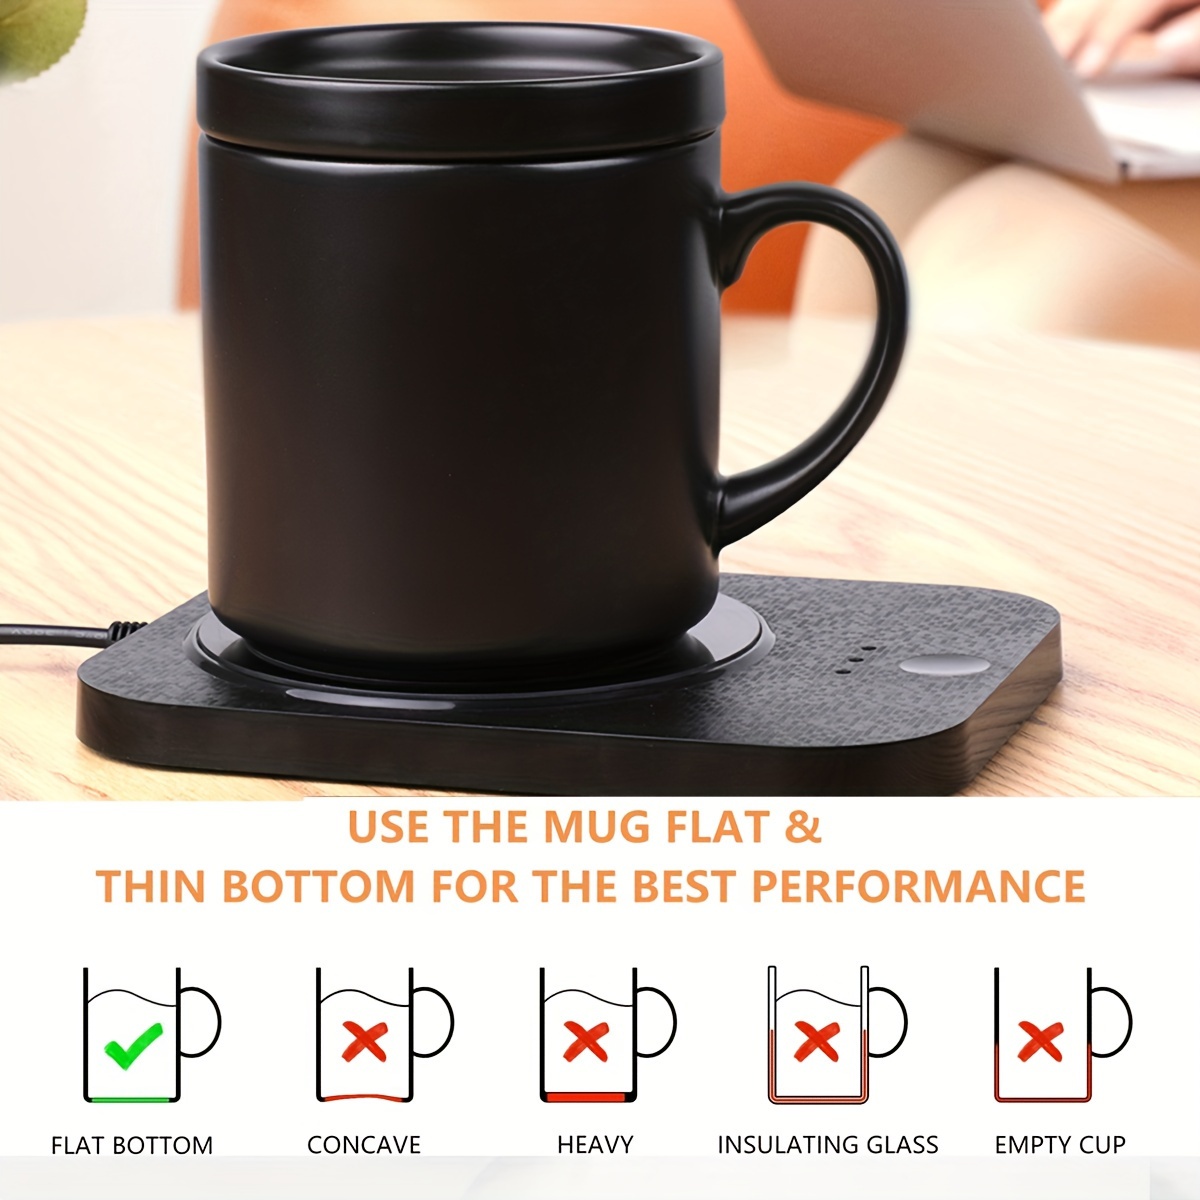 Improvements 2-in-1 Mug with Warmer and Phone Wireless Charger